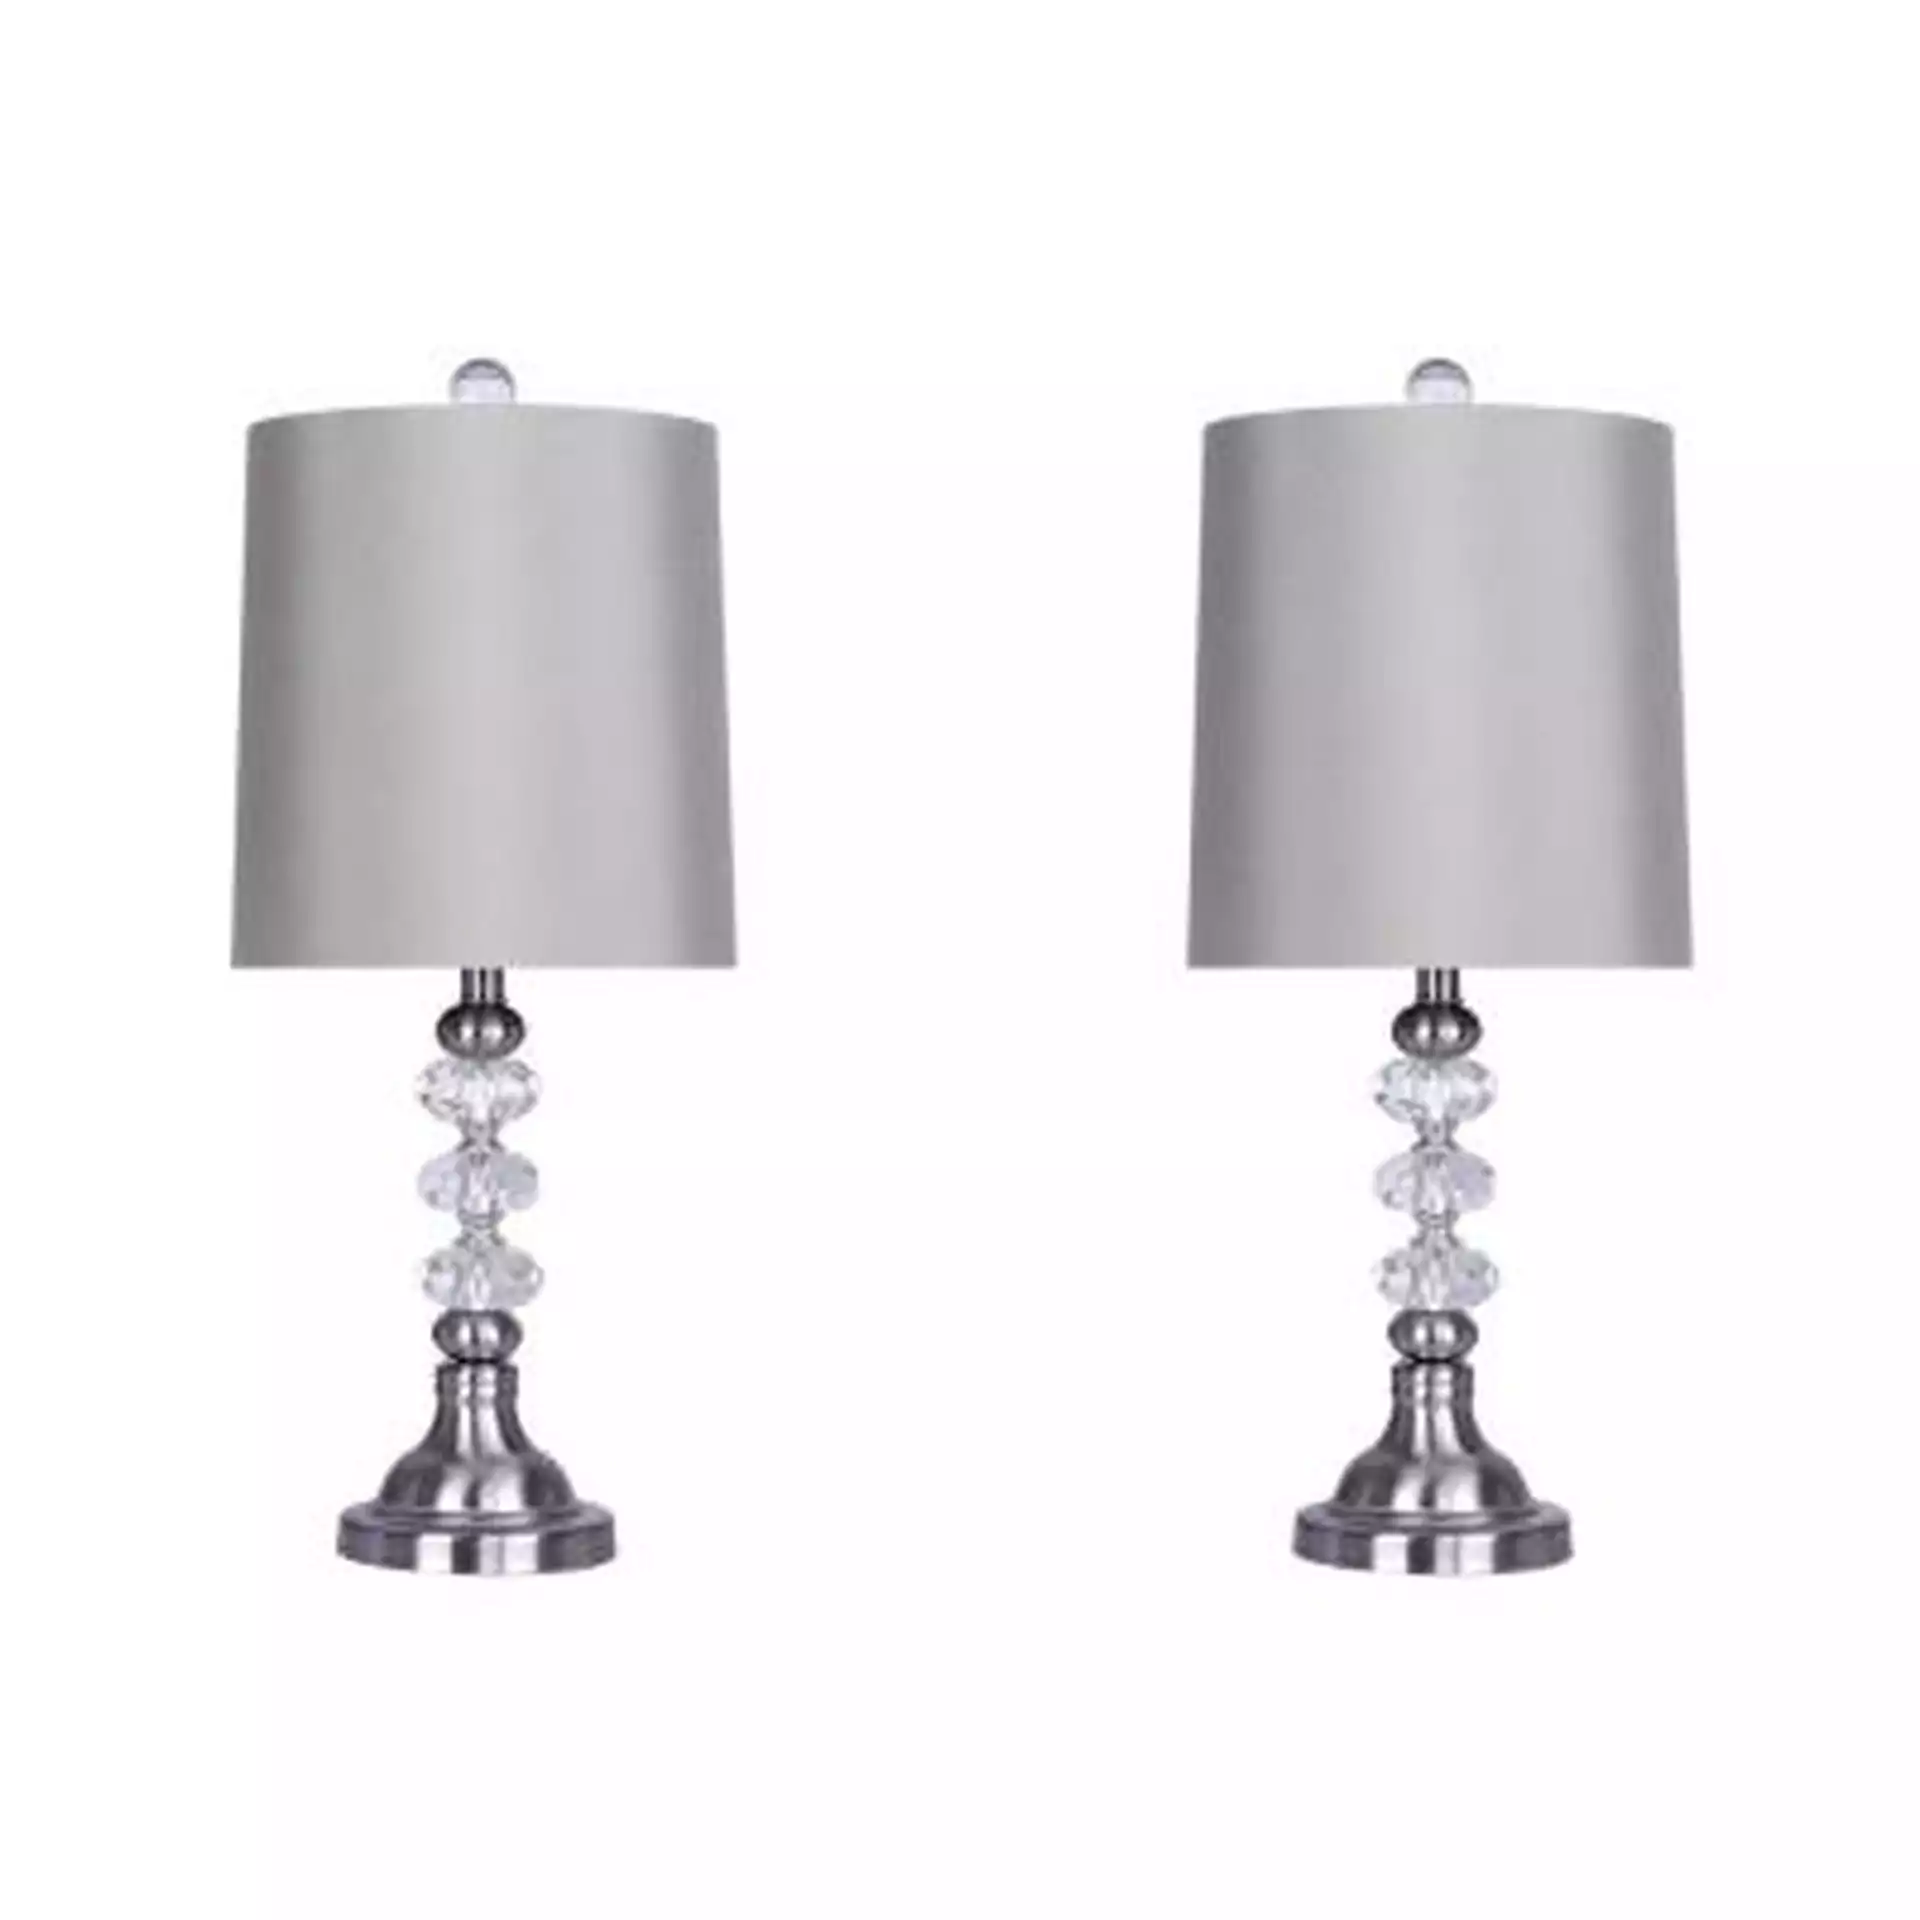 GRANDVIEW GALLERY 20 in. Genuine Crystal Accent Lamps with Brushed Nickel Accents and Grey Silk-Like Shades (2 Pack)